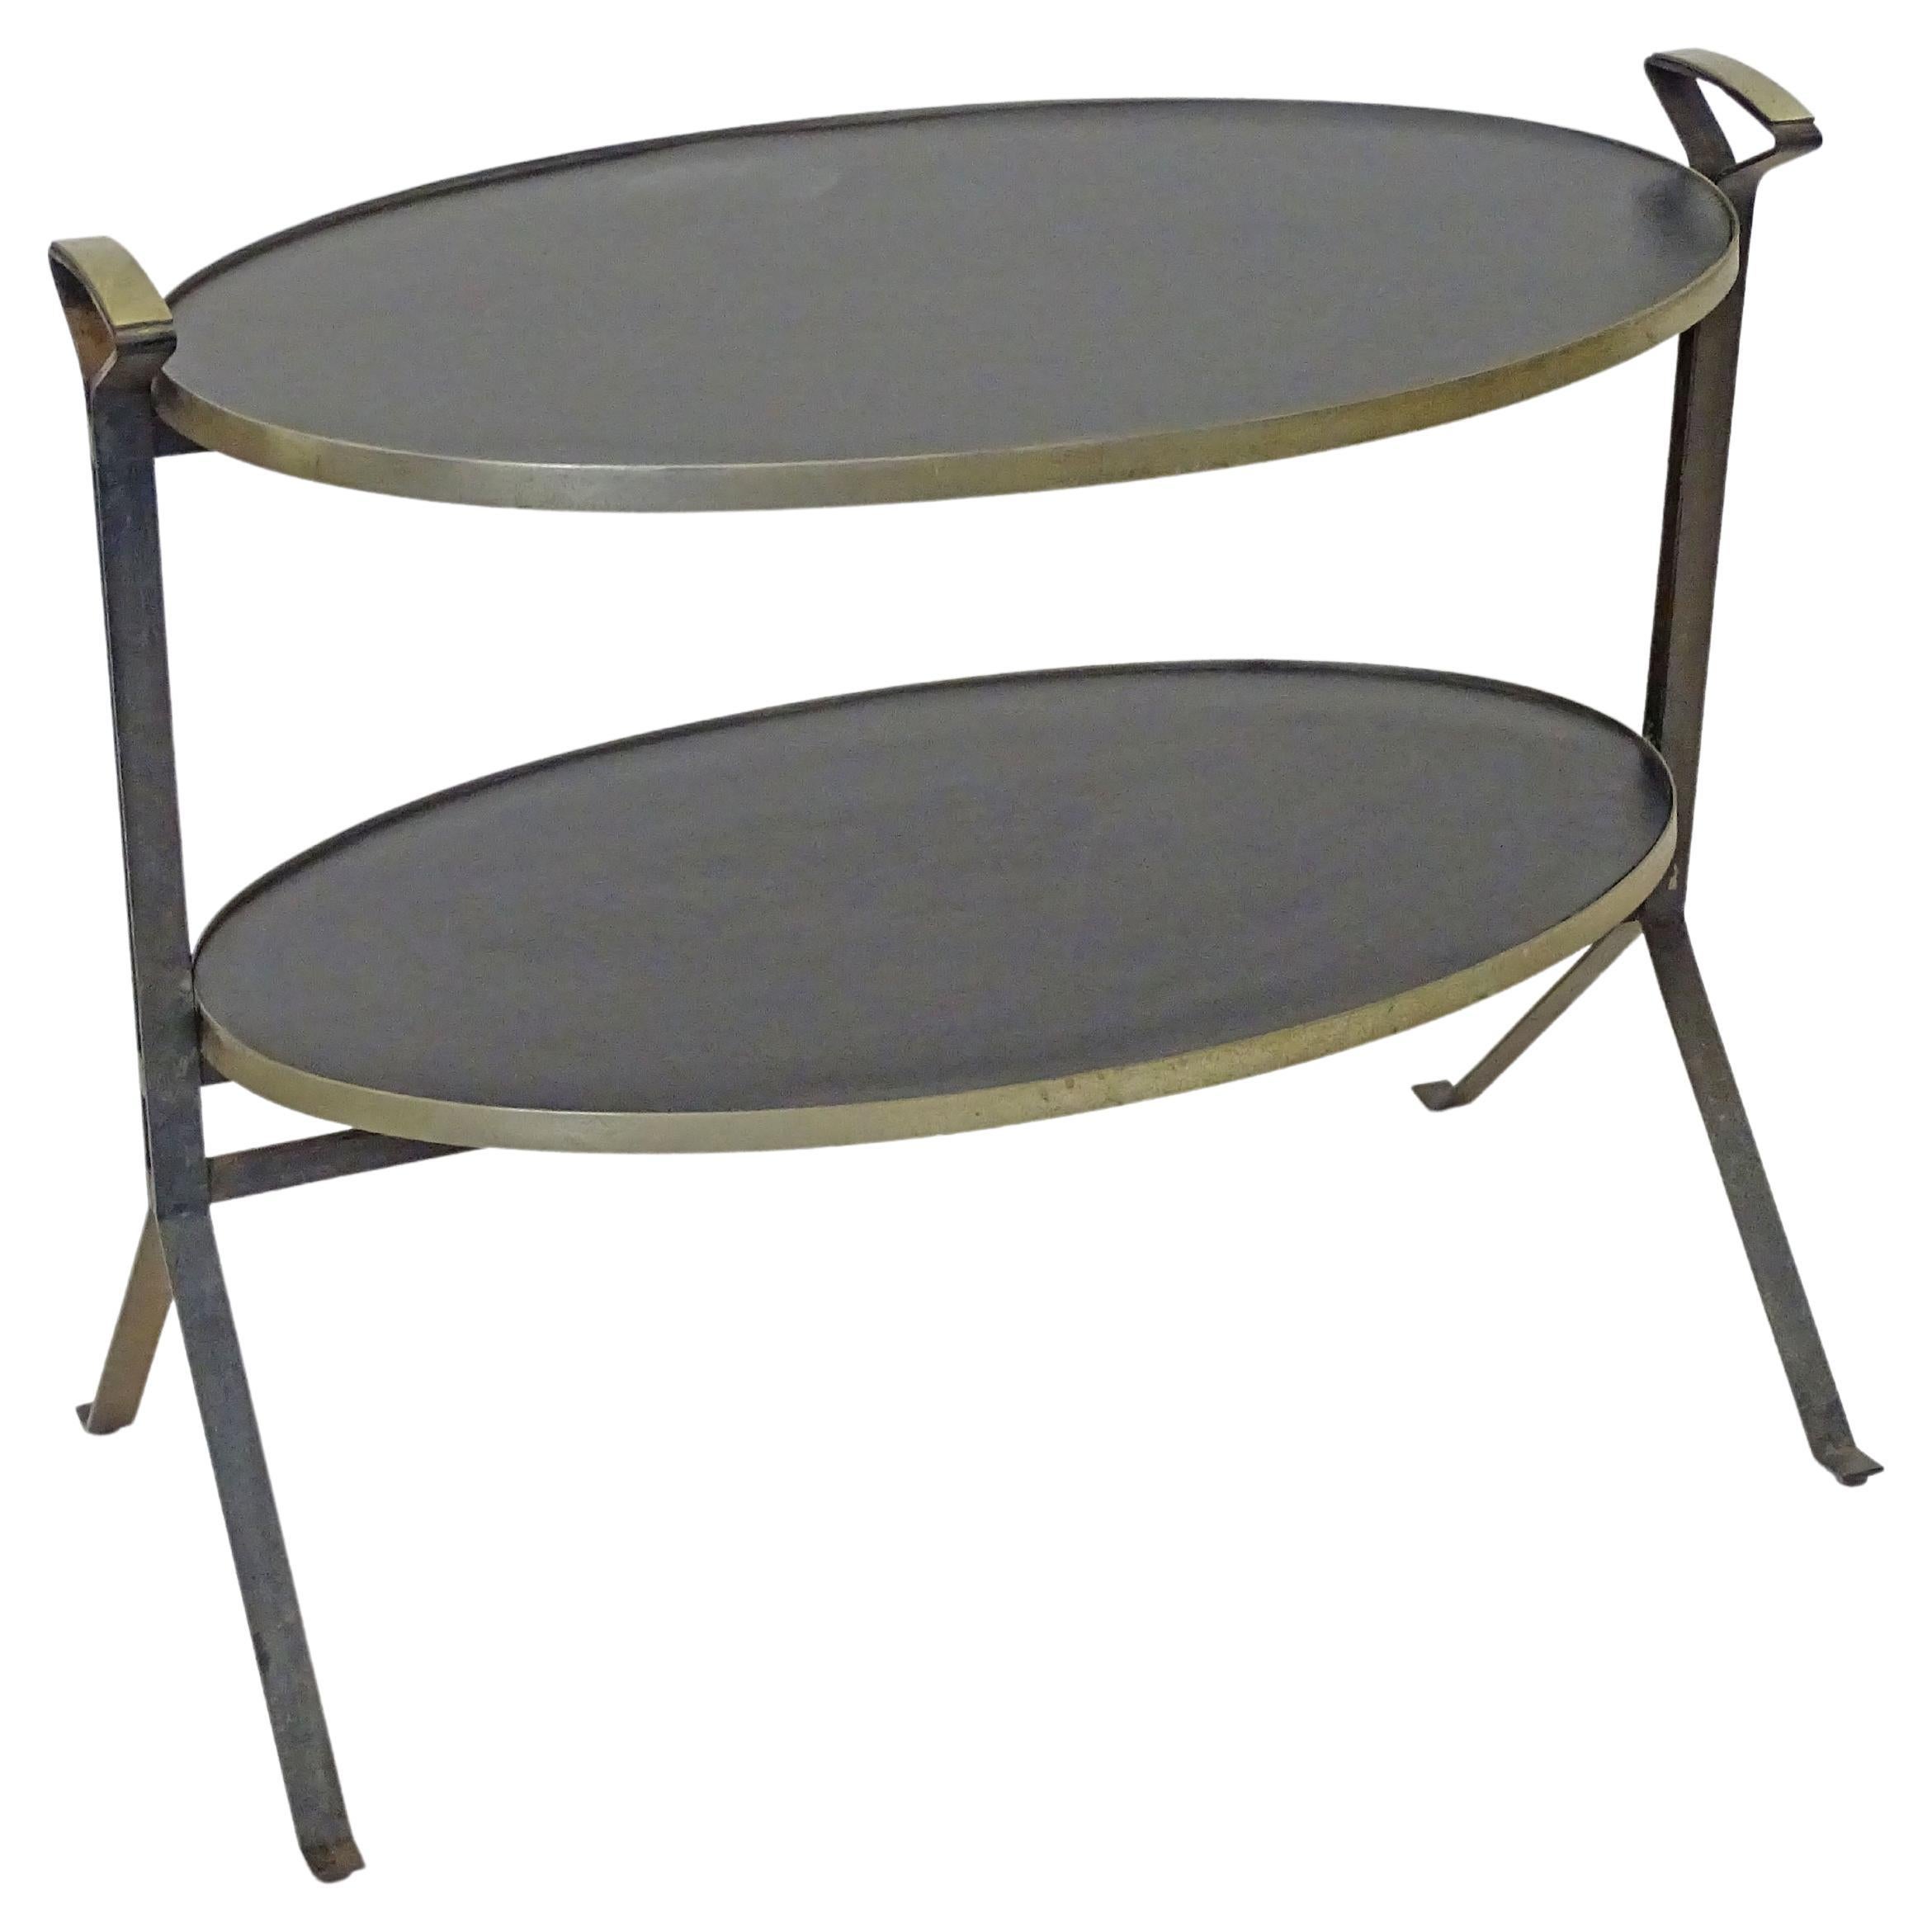 Architectural Oval Two Tier Serving Table with Handles, Italy, 1950s